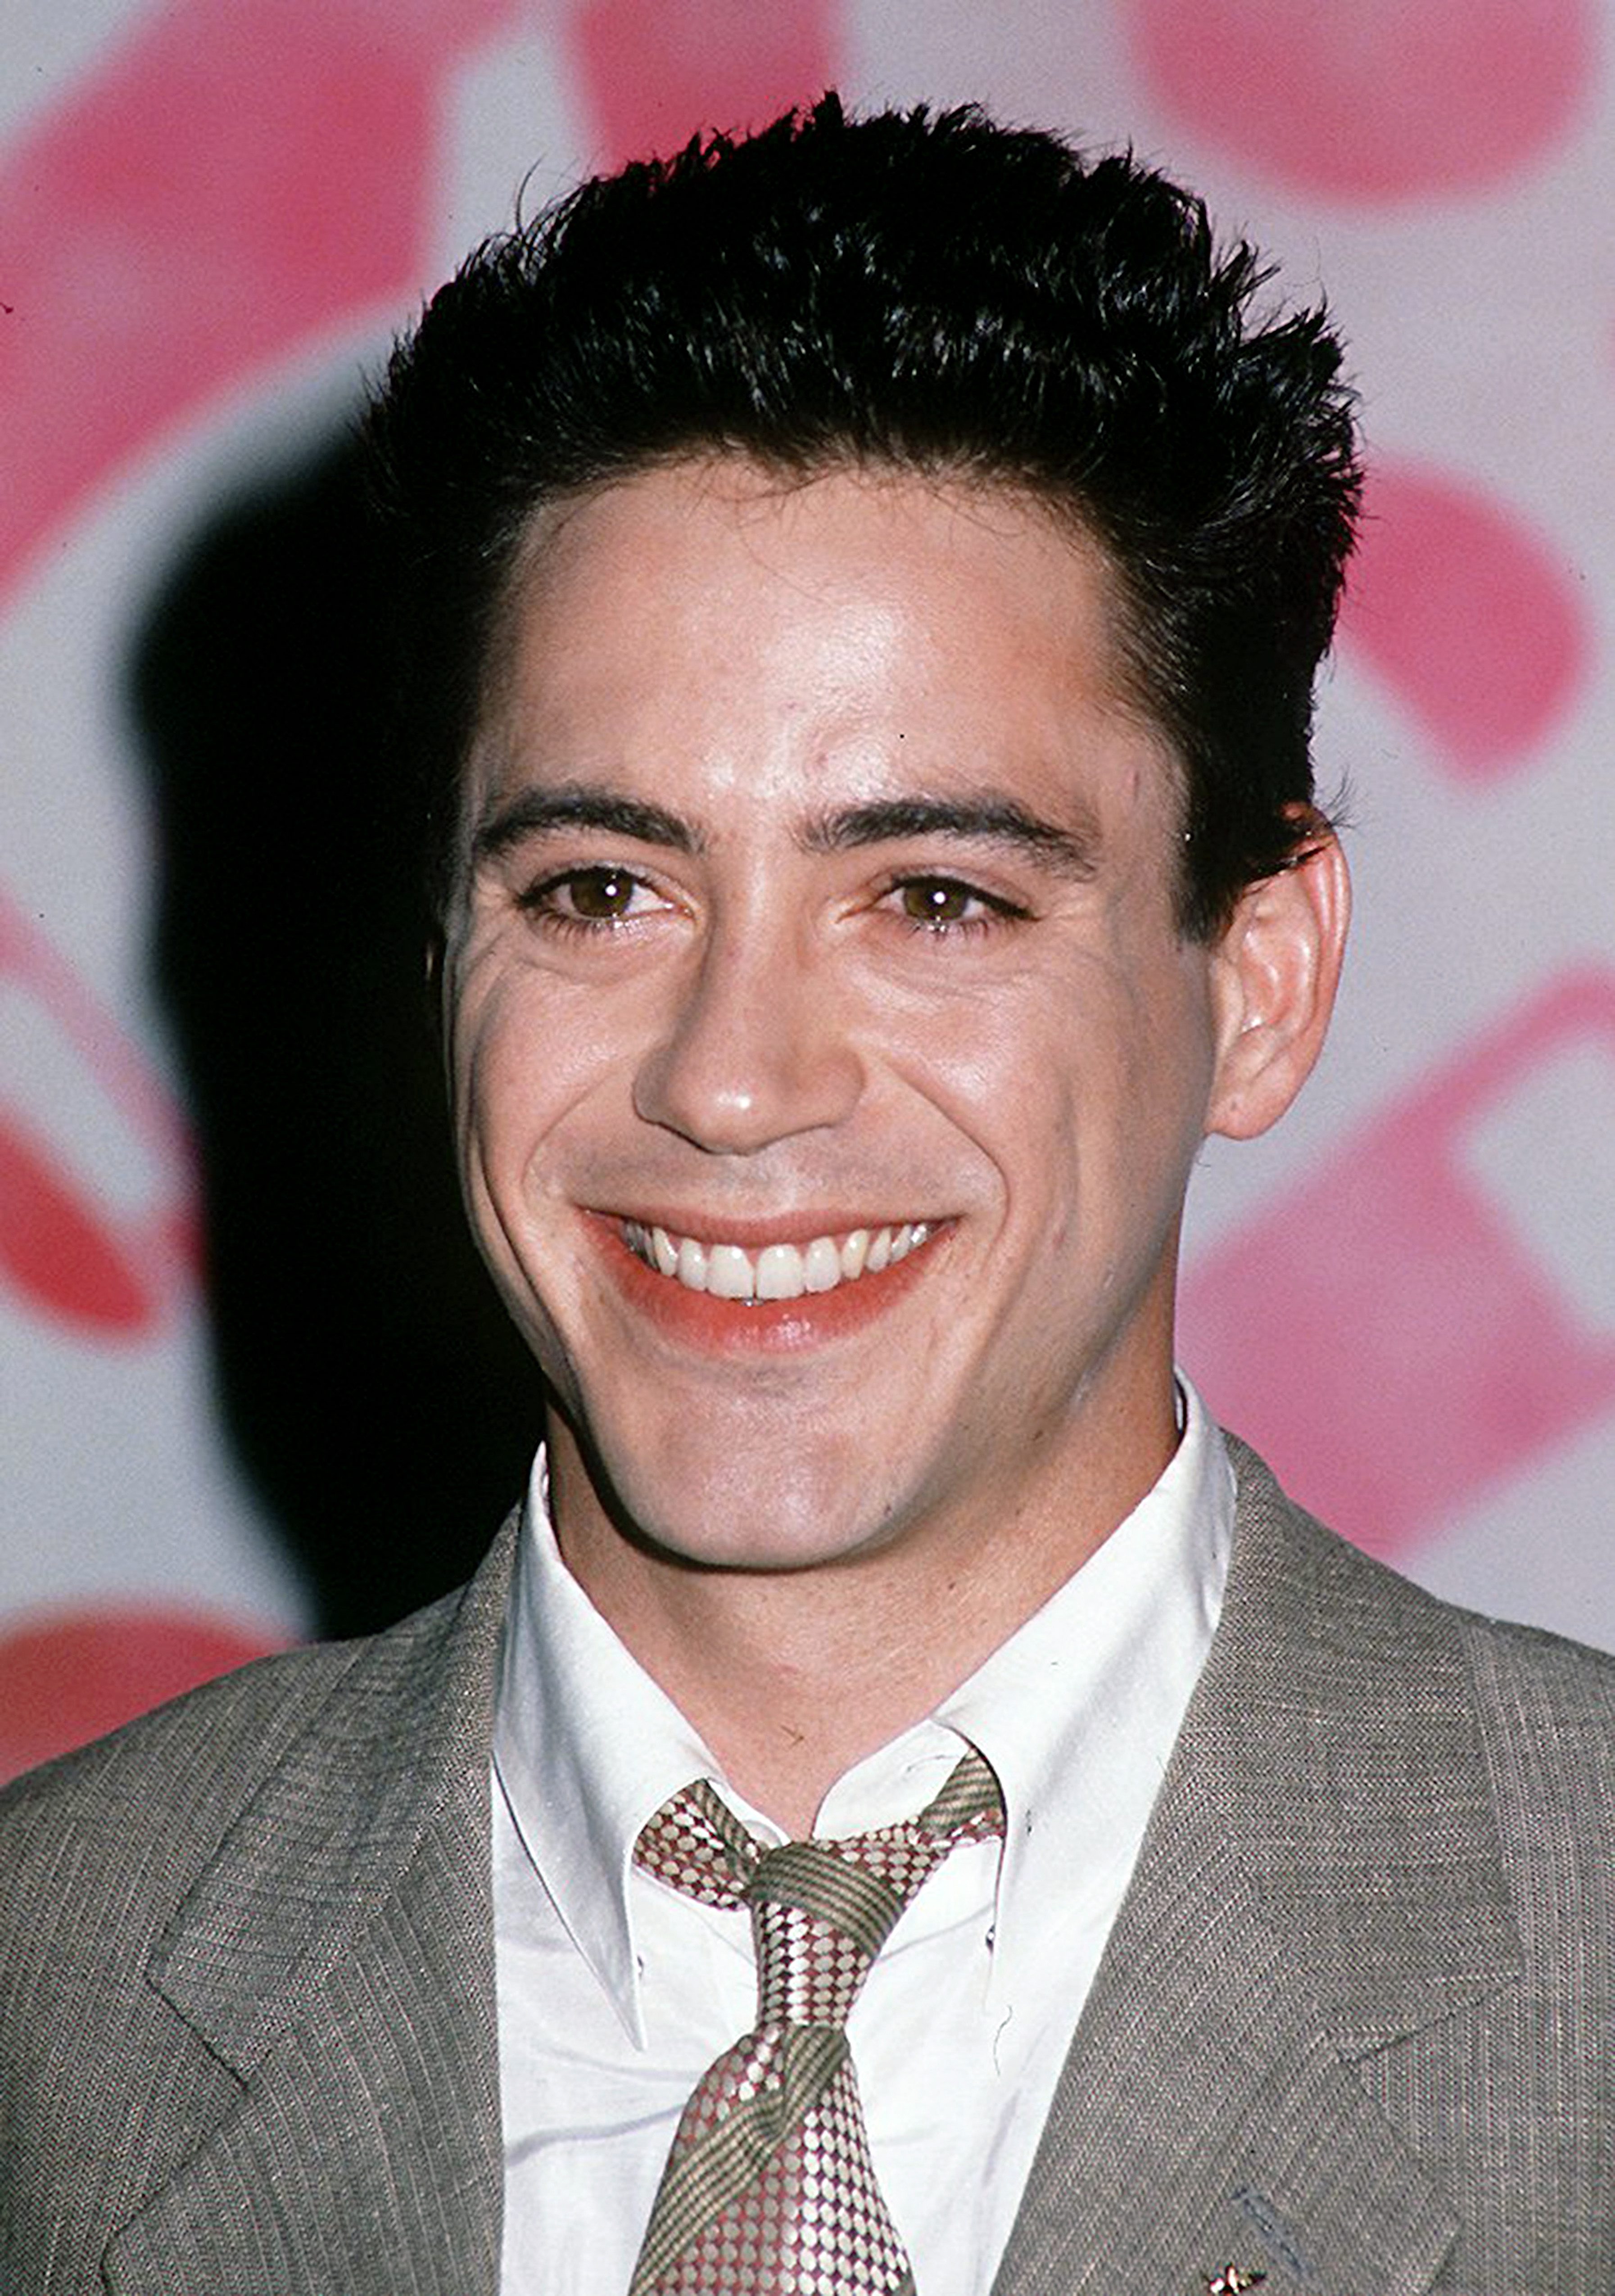 Robert Downey, Jr. photographed in 1992 | Source: Getty Images